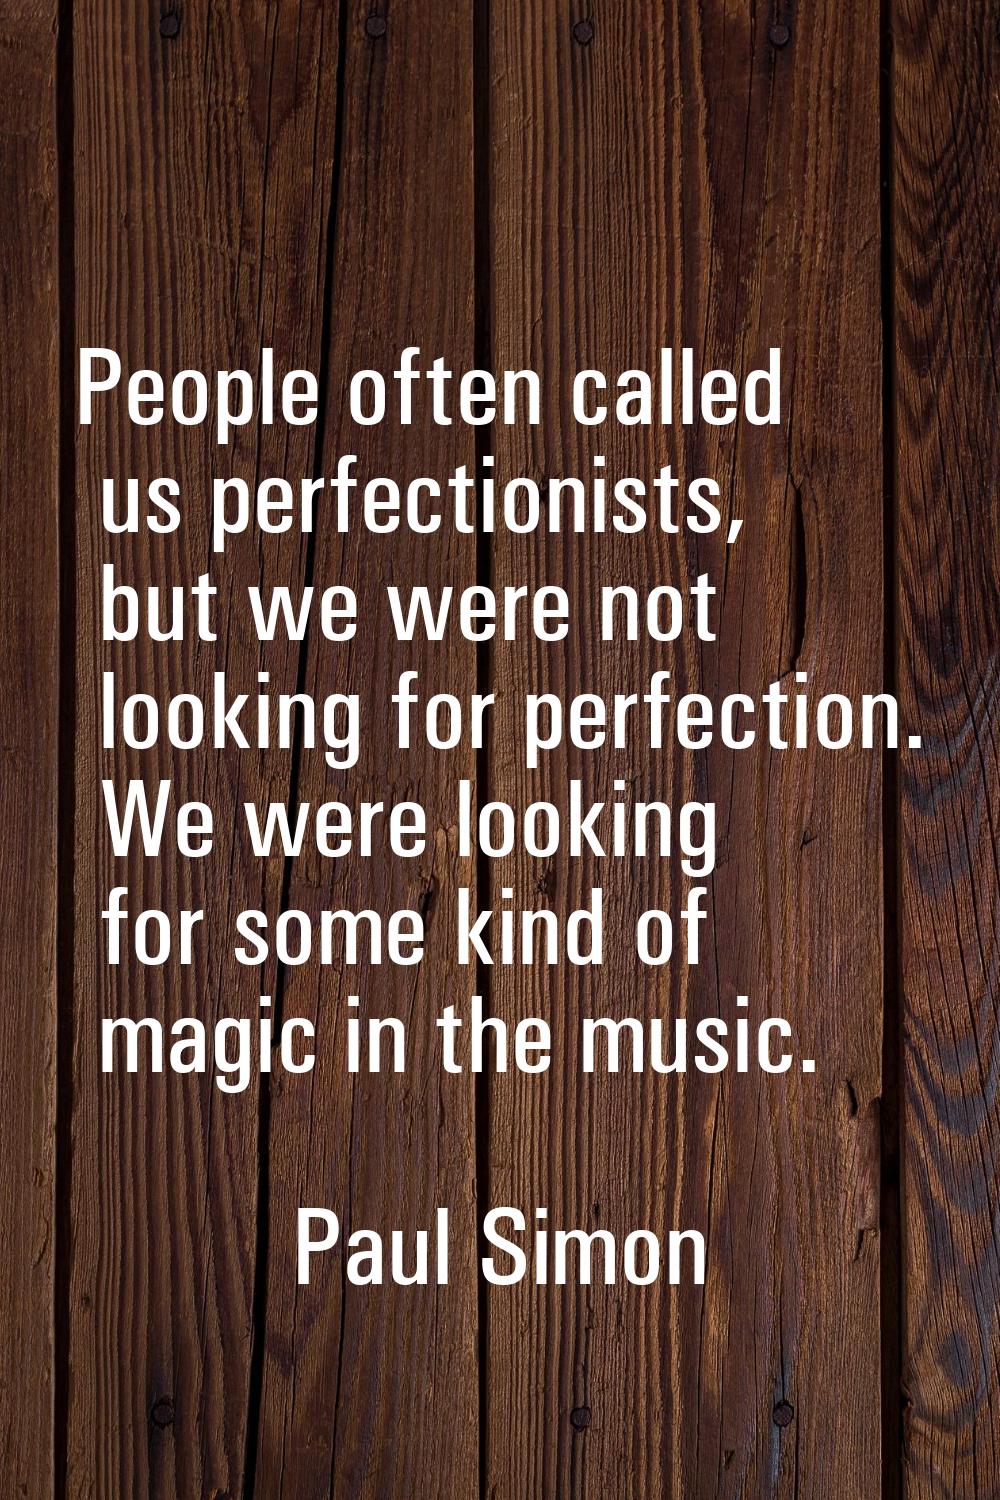 People often called us perfectionists, but we were not looking for perfection. We were looking for 